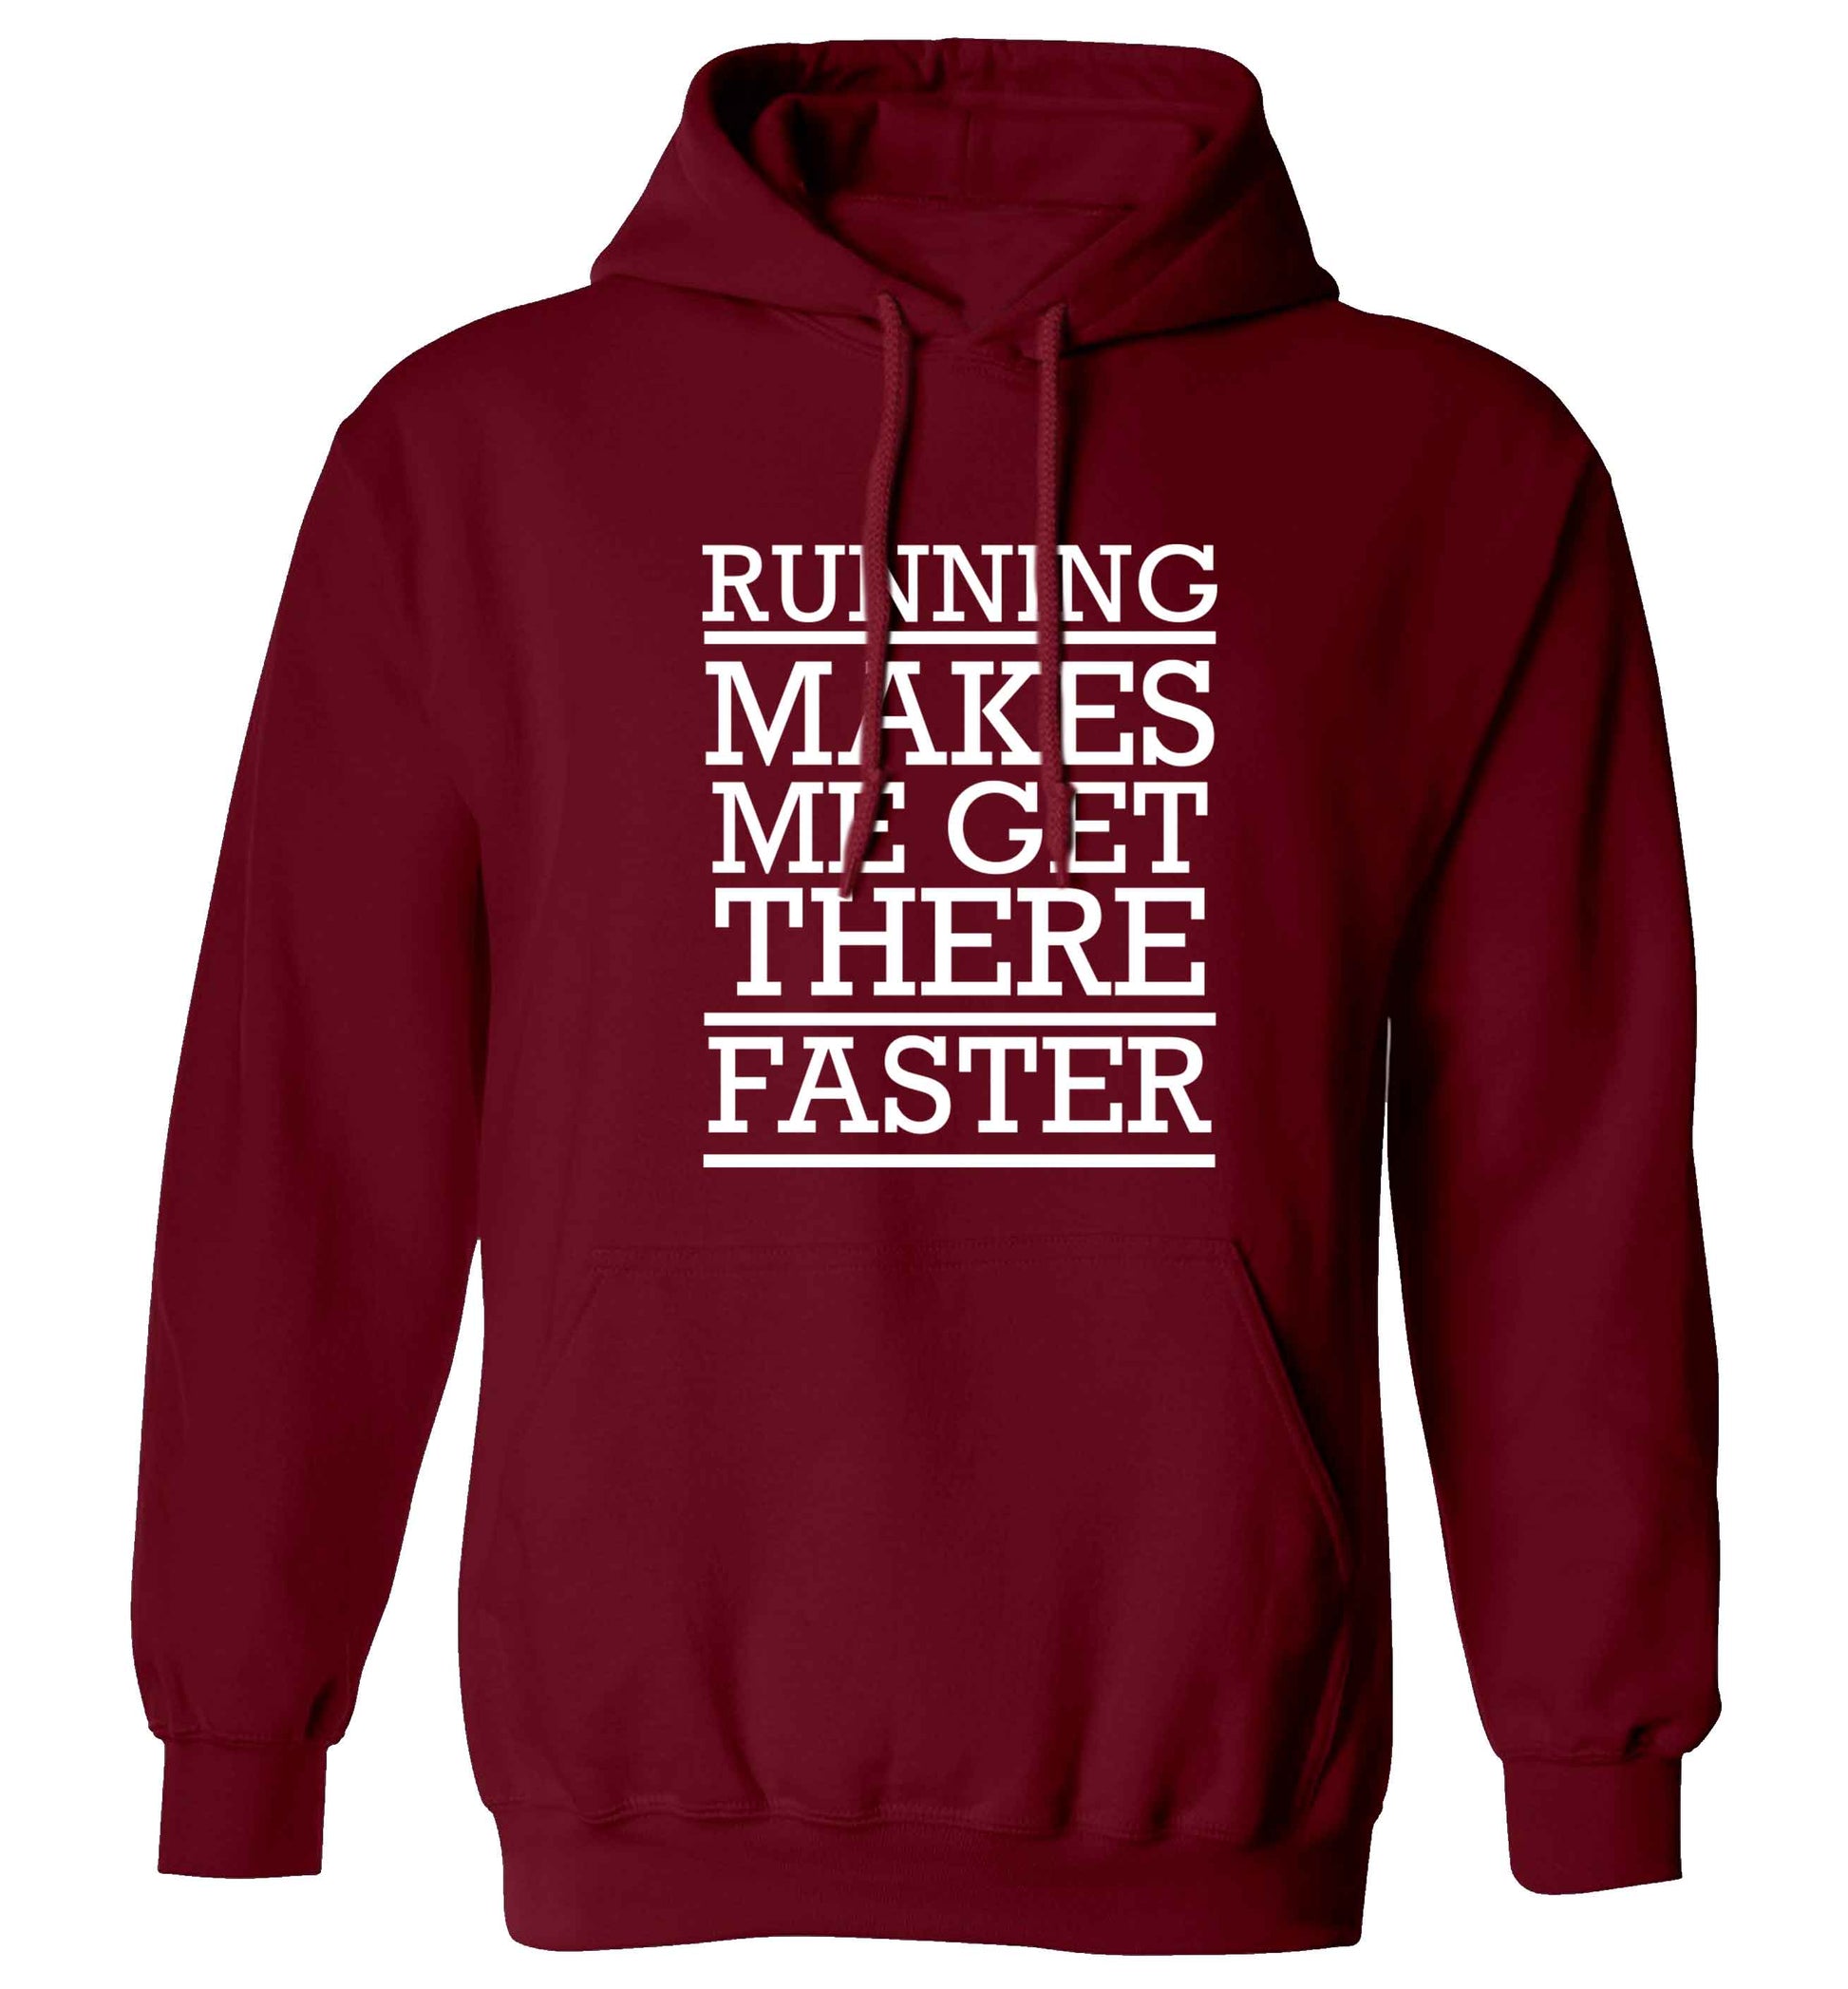 Running makes me get there faster adults unisex maroon hoodie 2XL